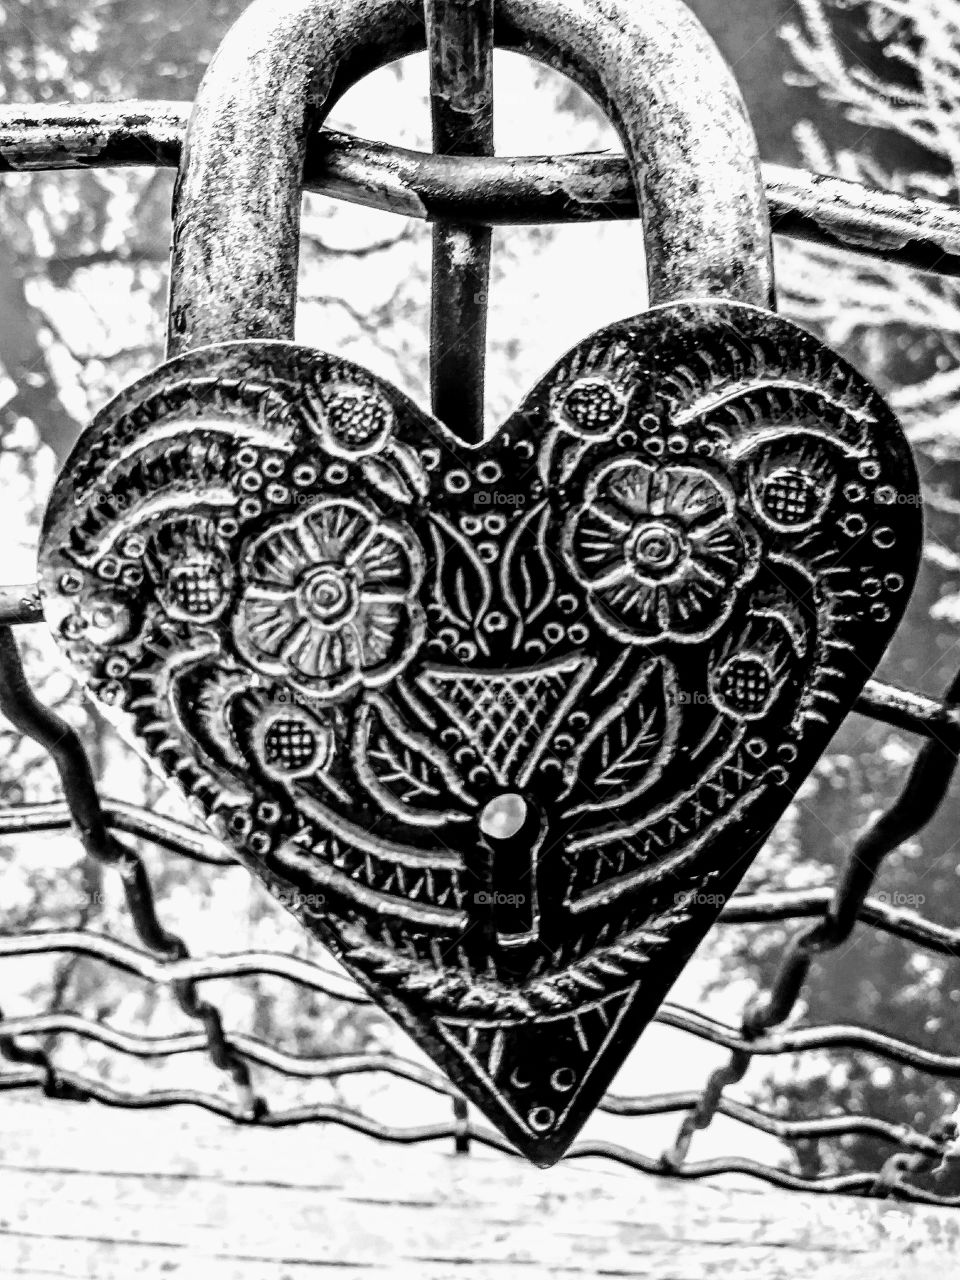 black and white of engraved love lock on bridge. very detailed decoration